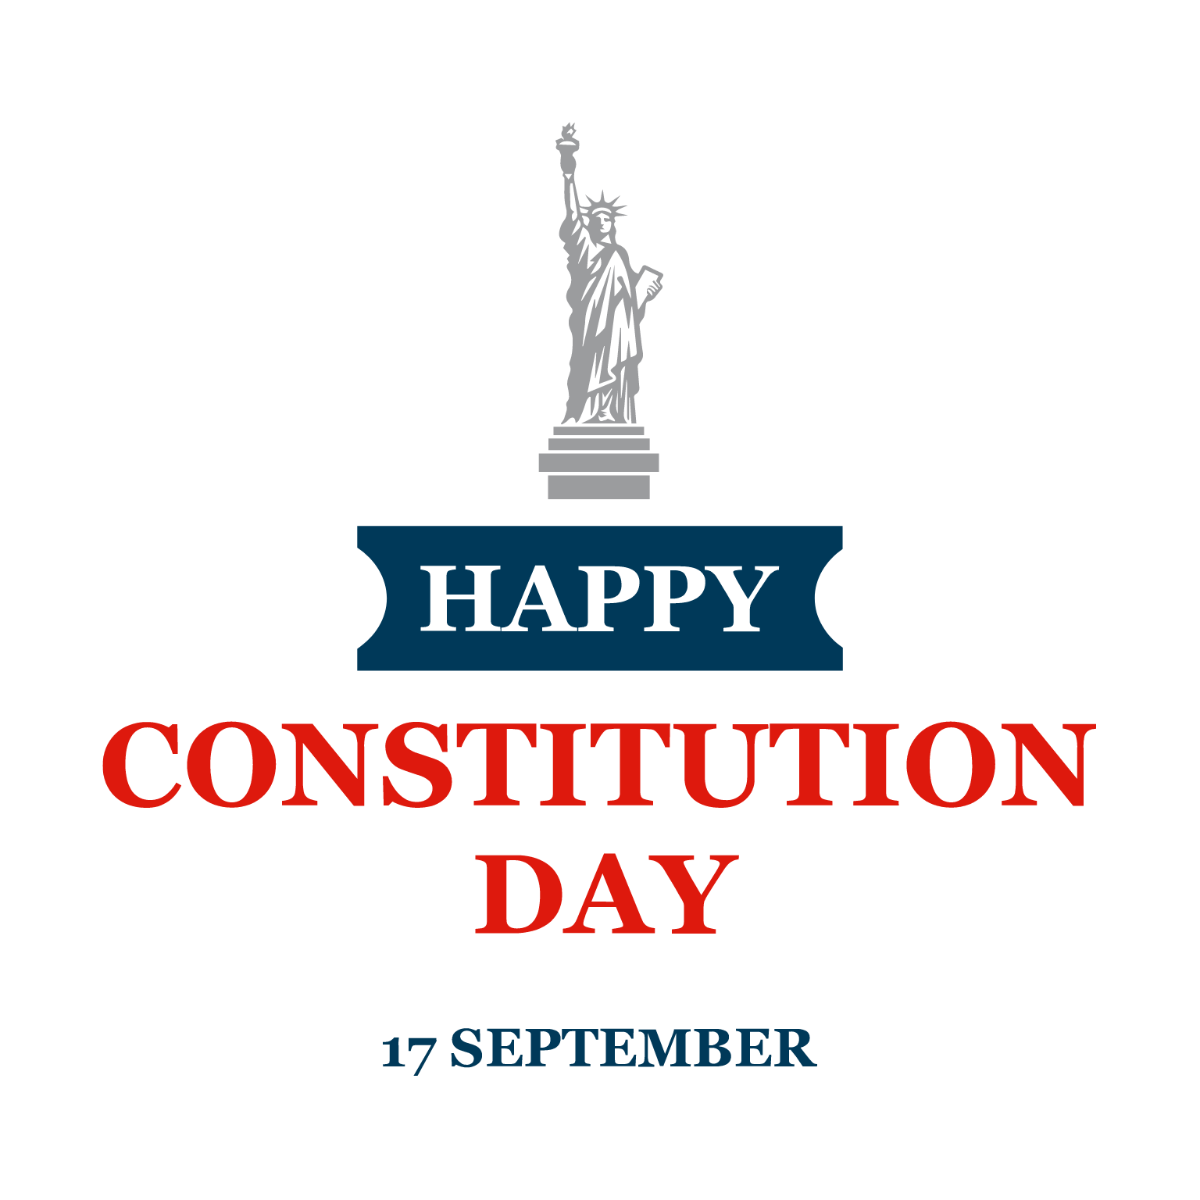 Free Constitution and Citizenship Day Promotional Clip Art Template